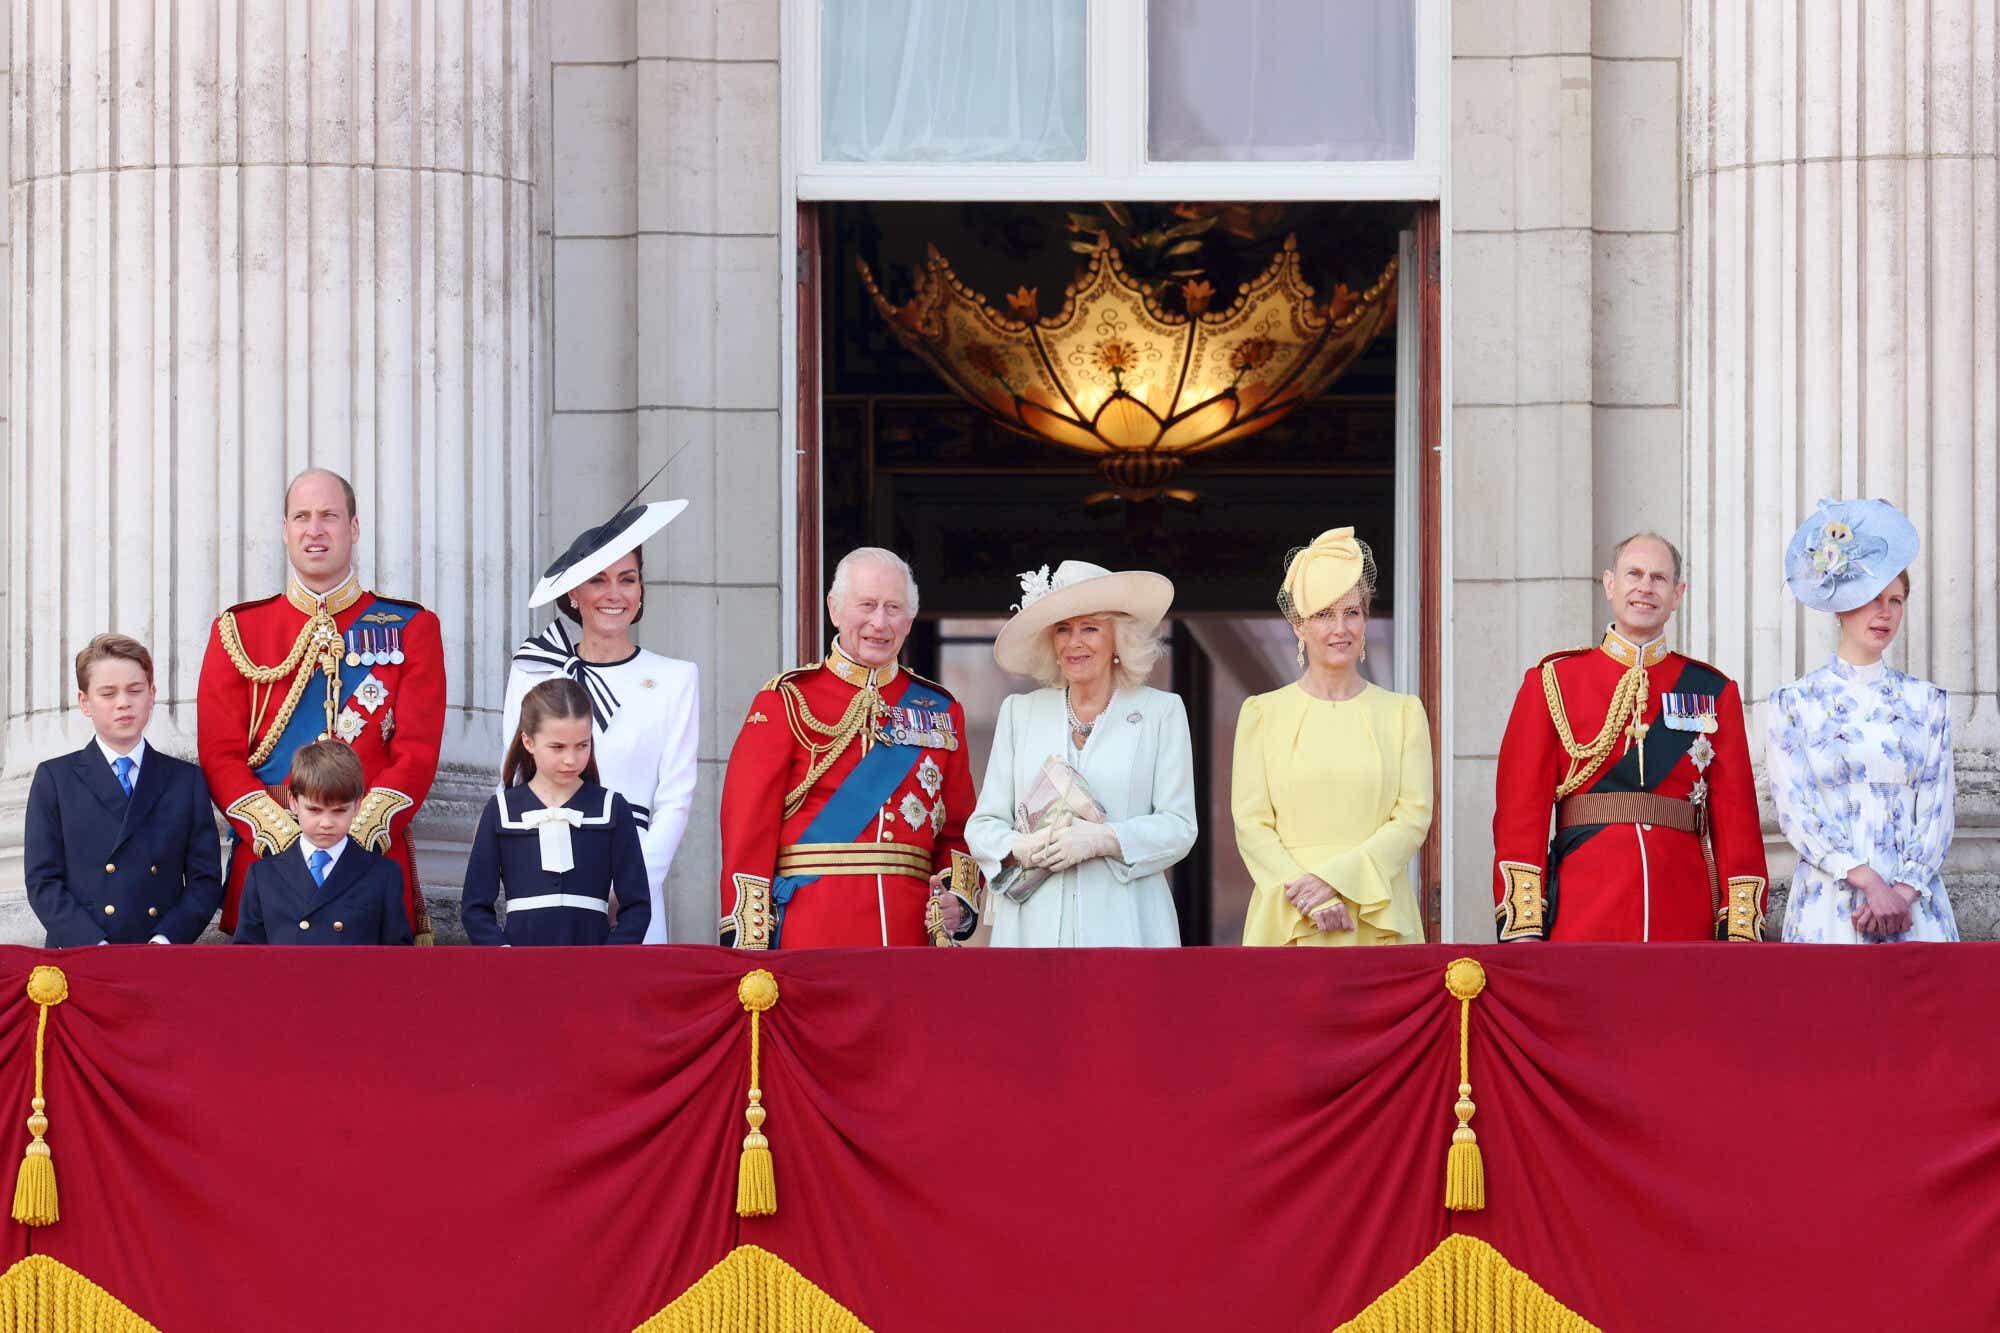 Prince William, Princess Catherine and their children with King Charles III and Queen Camilla stand on the balcony of Buckingham Palace after attending the King's Birthday Parade.